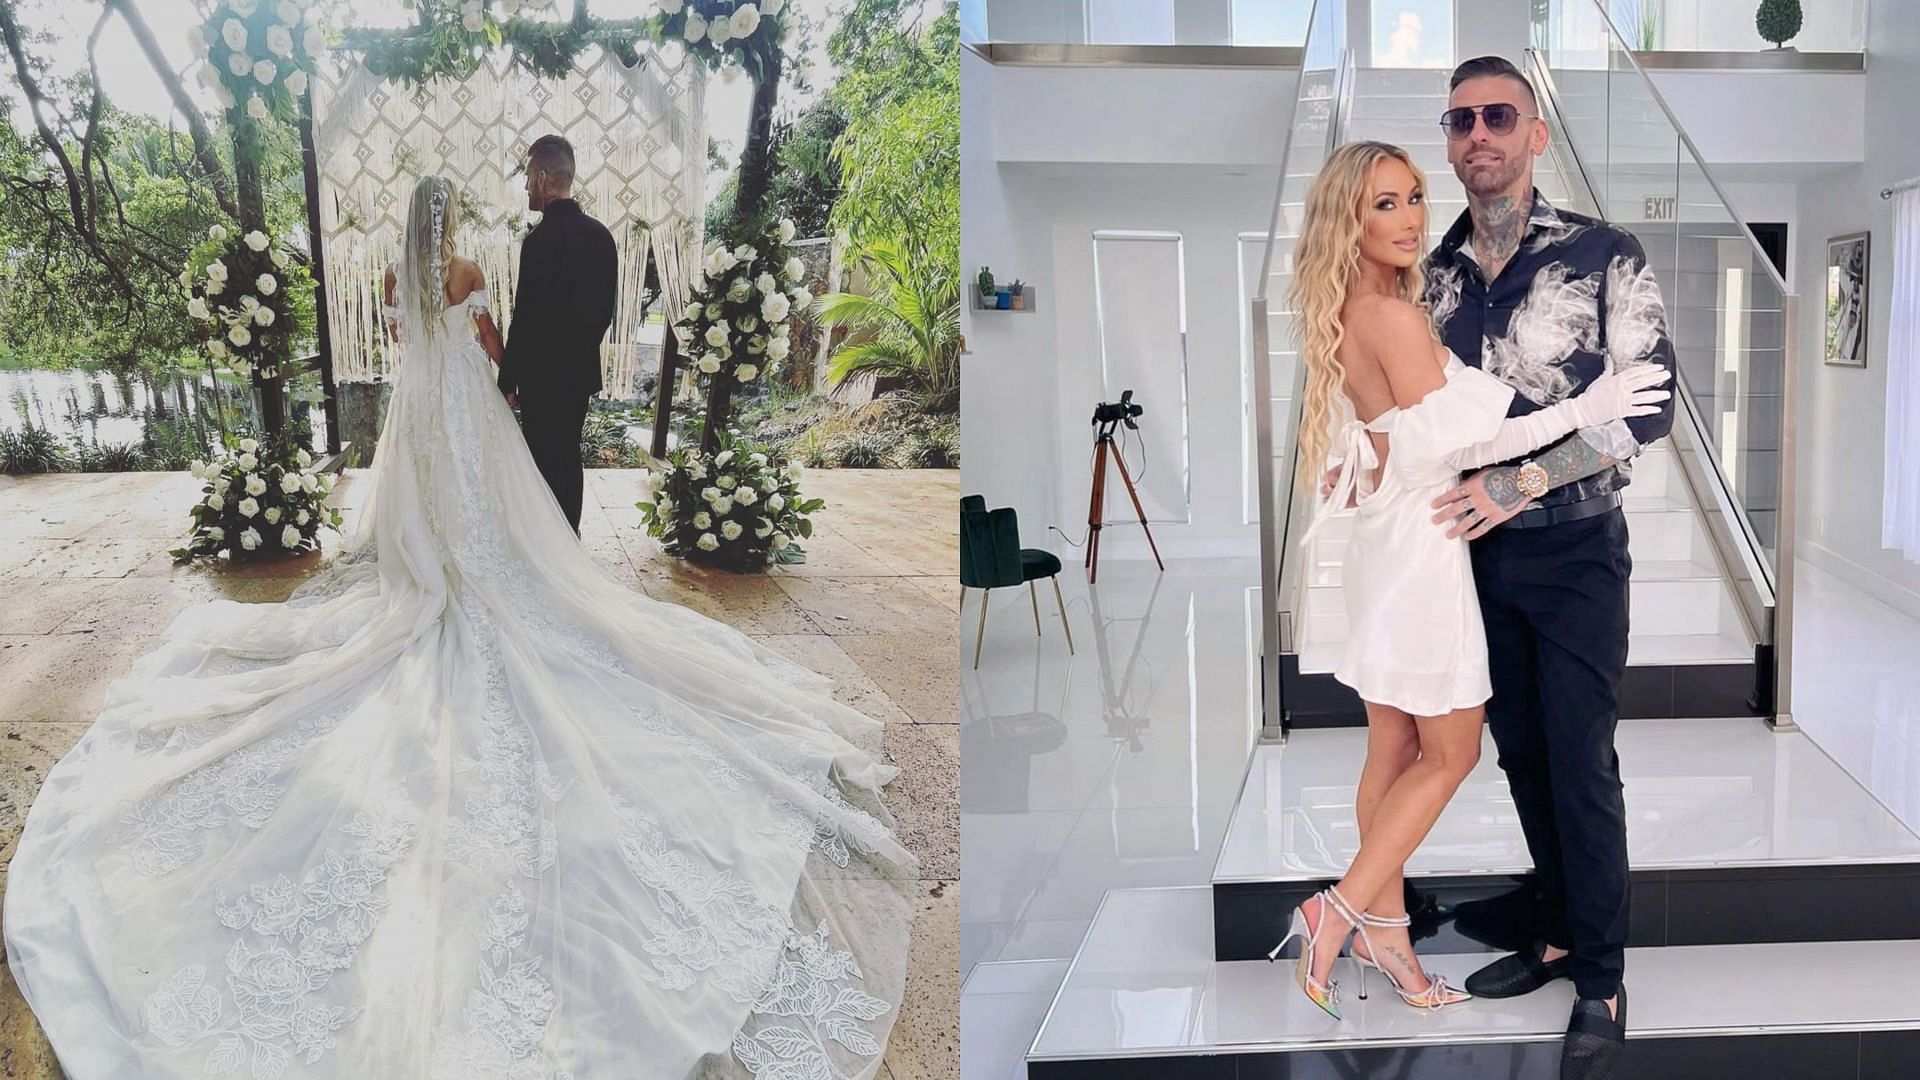 Carmella and Corey Graves married earlier this month